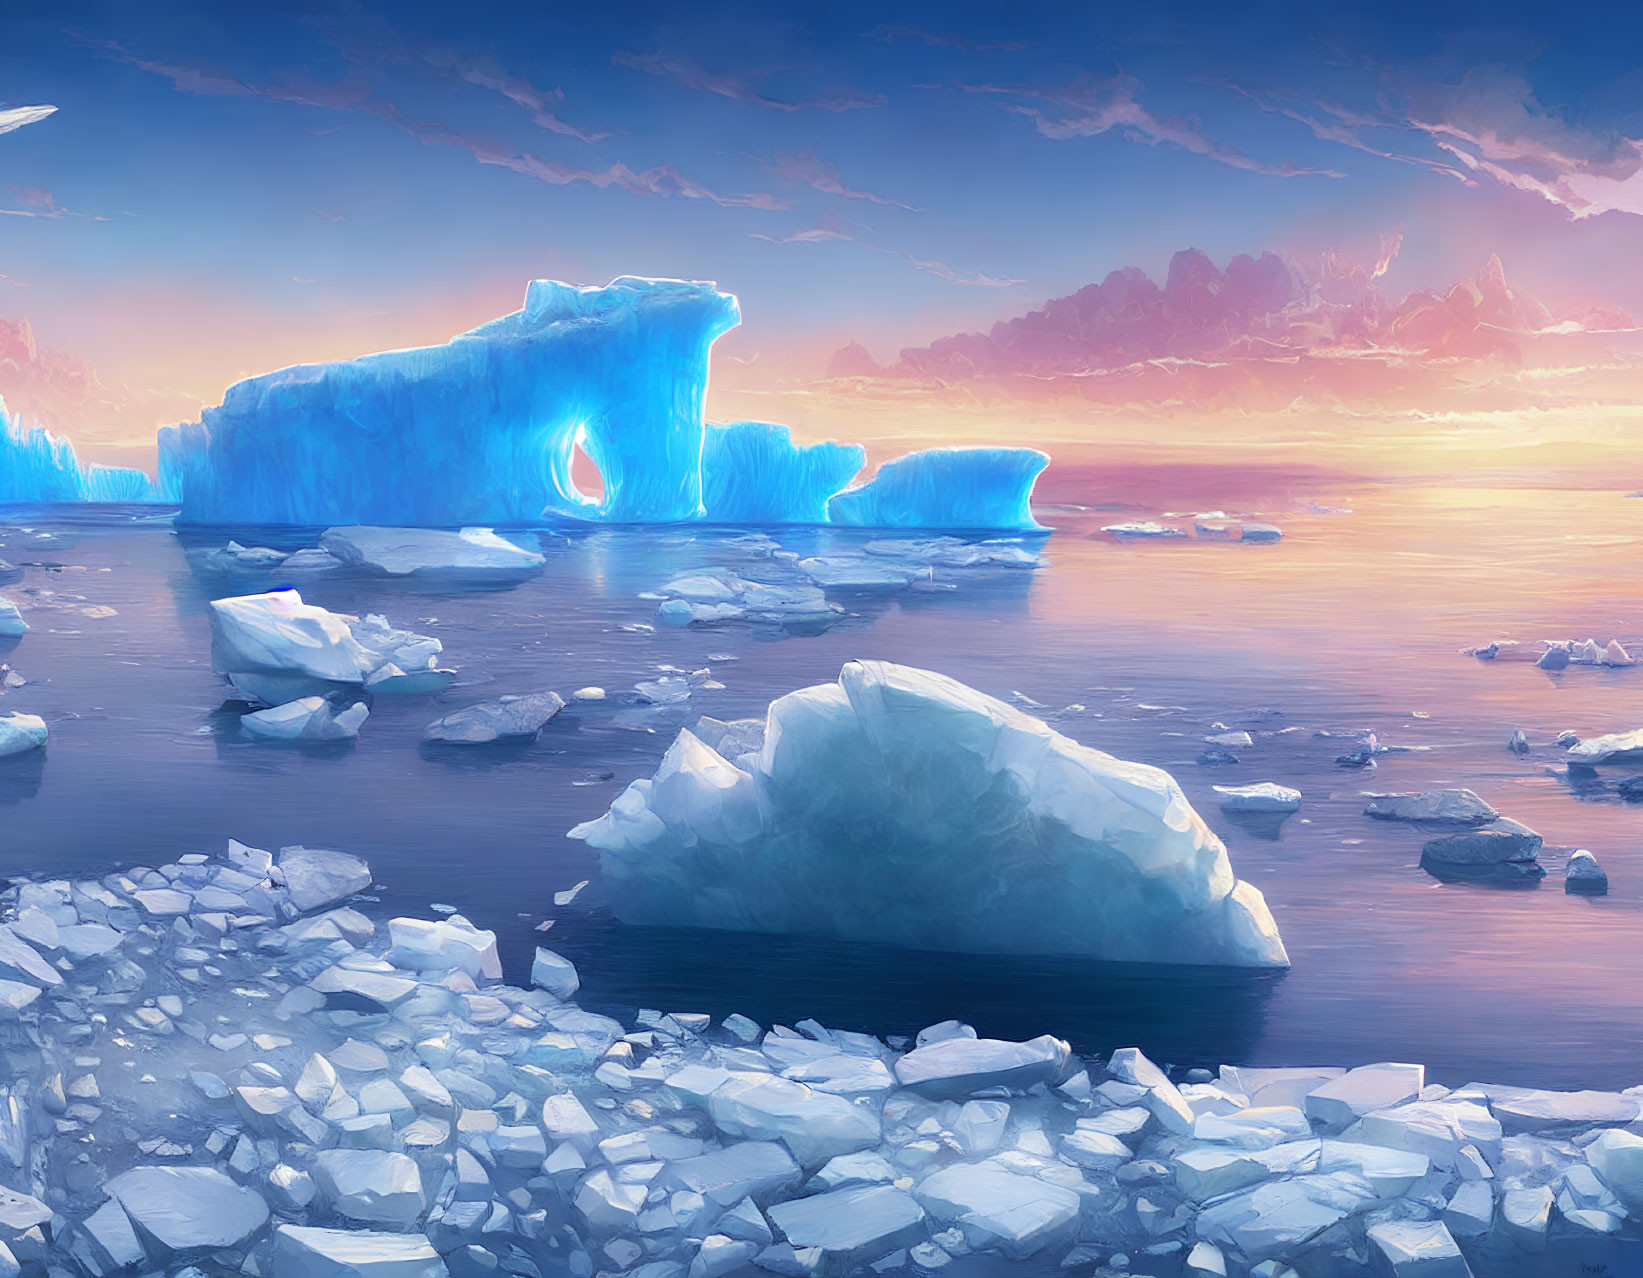 Arctic scene with glowing blue icebergs on calm waters at sunset or sunrise